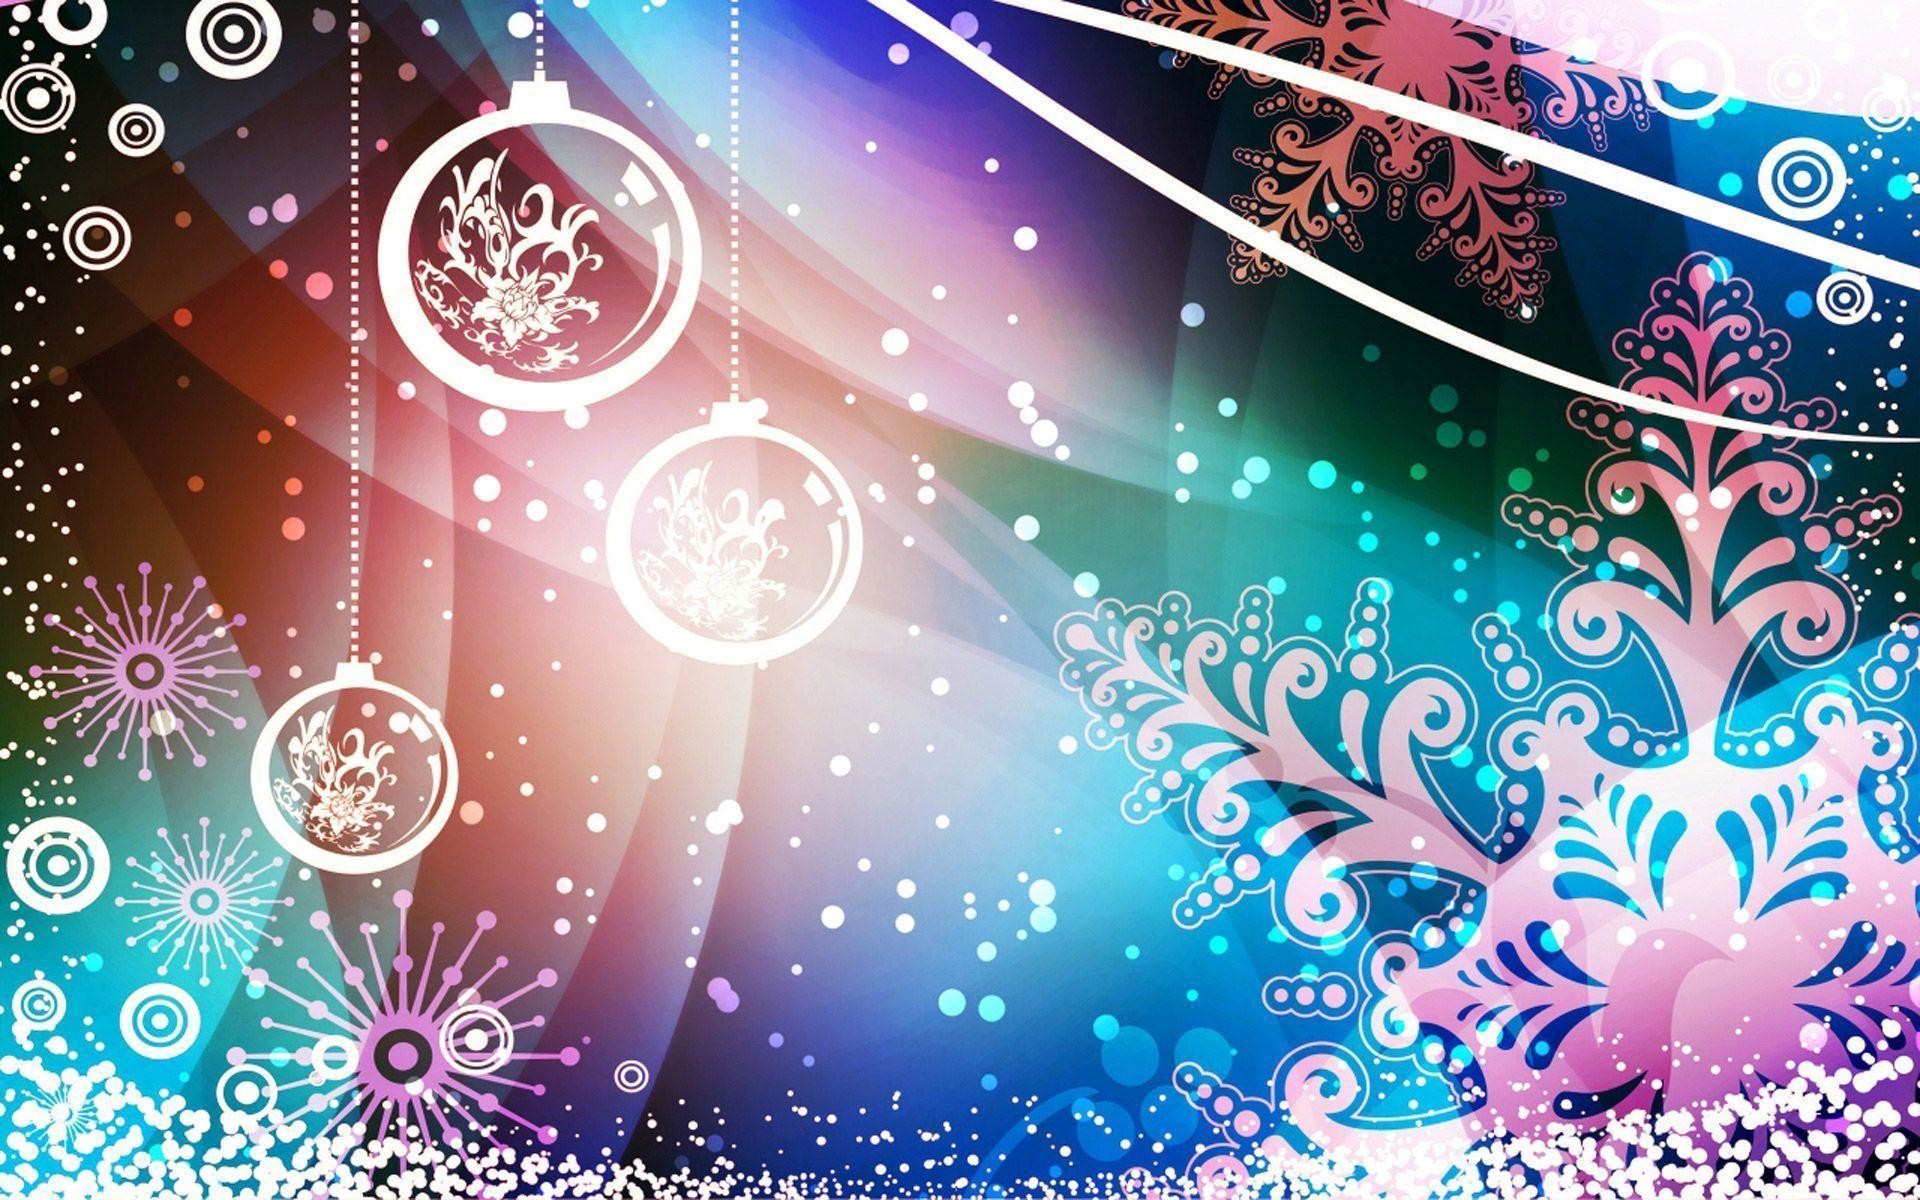 1920x1200 Free Computer Wallpaper Christmas 28628 Background | Widebackgrounds.